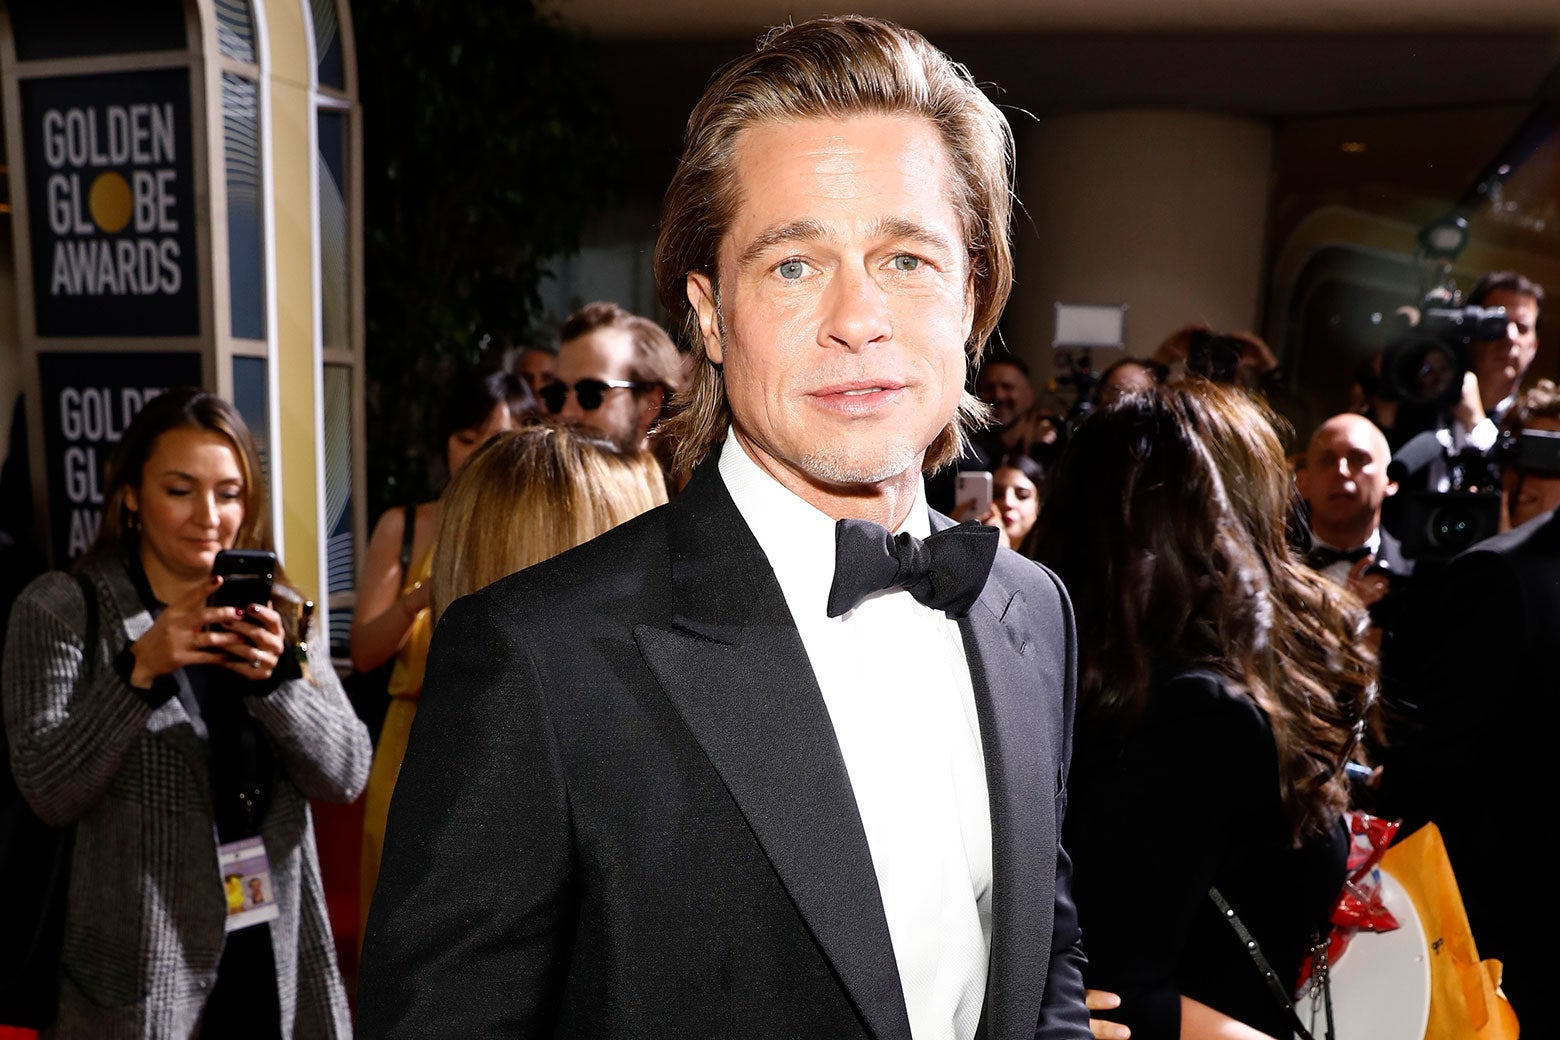 Brad Pitt, in a tux on the red carpet, looks at the camera with a slight smile.